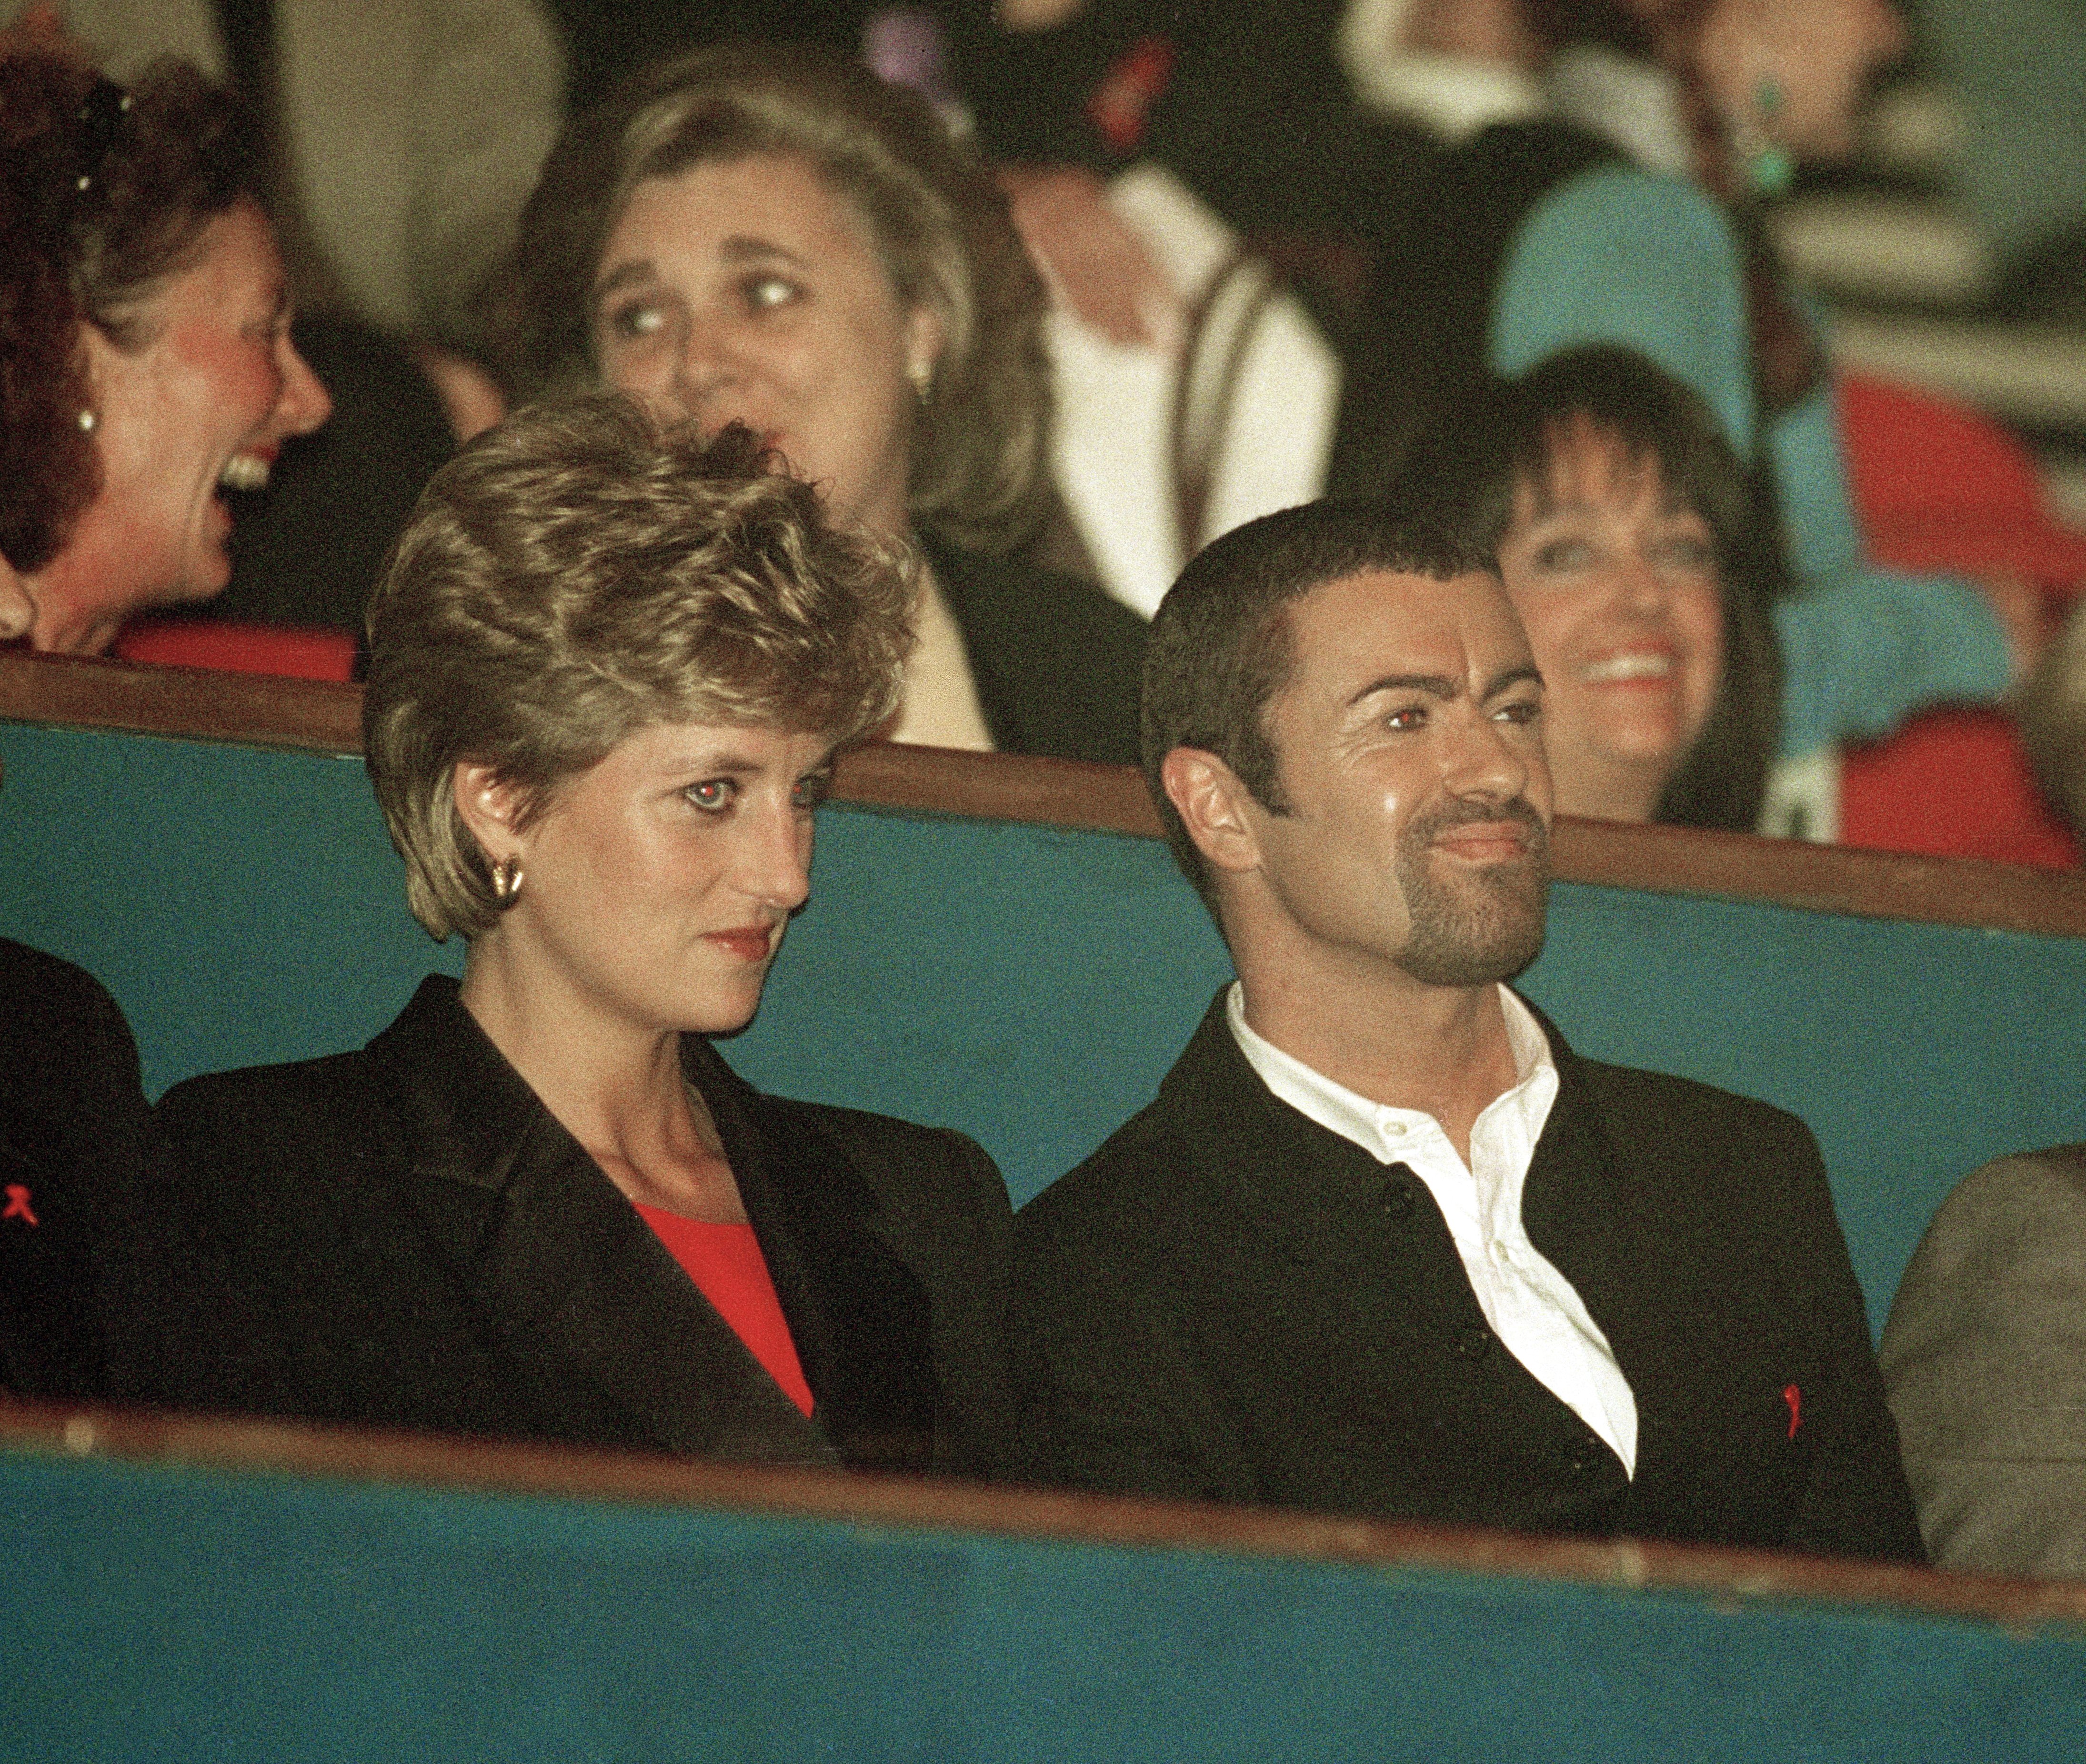 Princess Diana and George Michael attending "A Concert of Hope", a benefit concert on World AIDS Day at Wembley Arena in London, England on 1 December, 1994 | Source: Getty Images